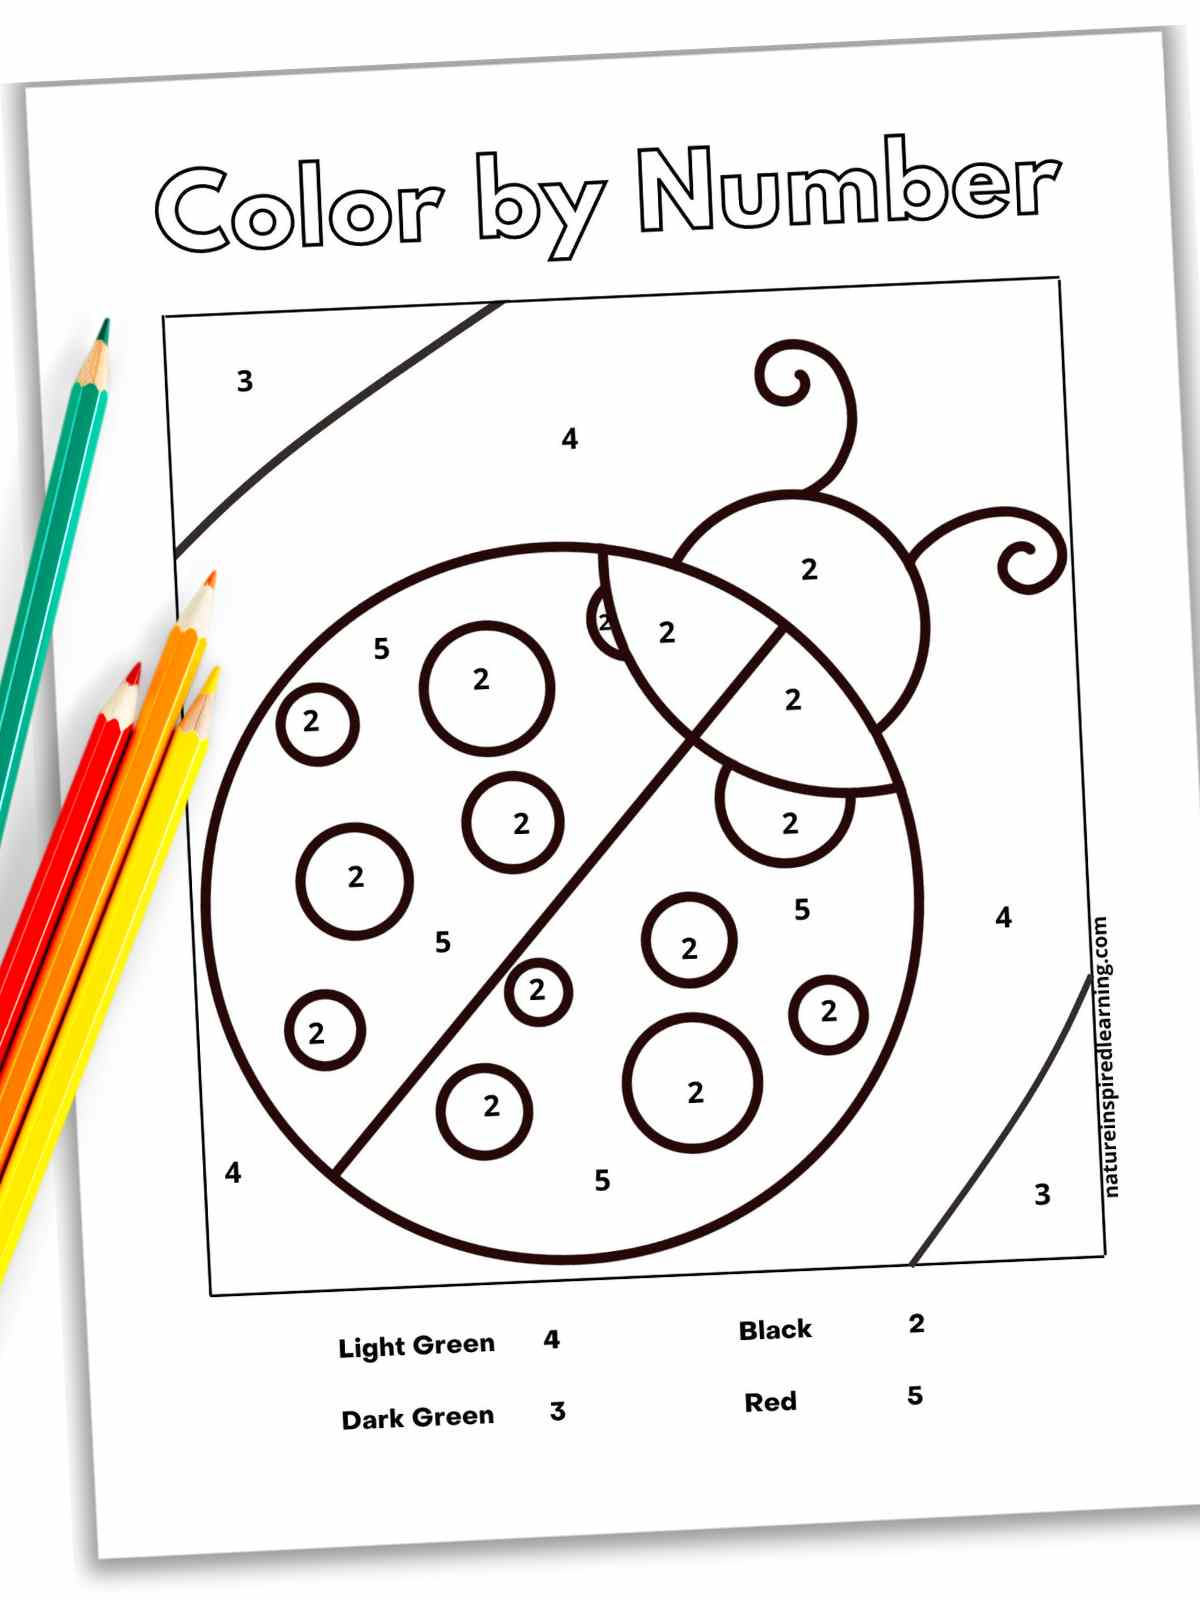 black and white printable with a ladybug with numbers on it with a color key below and title across top. Colored pencils on left side of sheet.